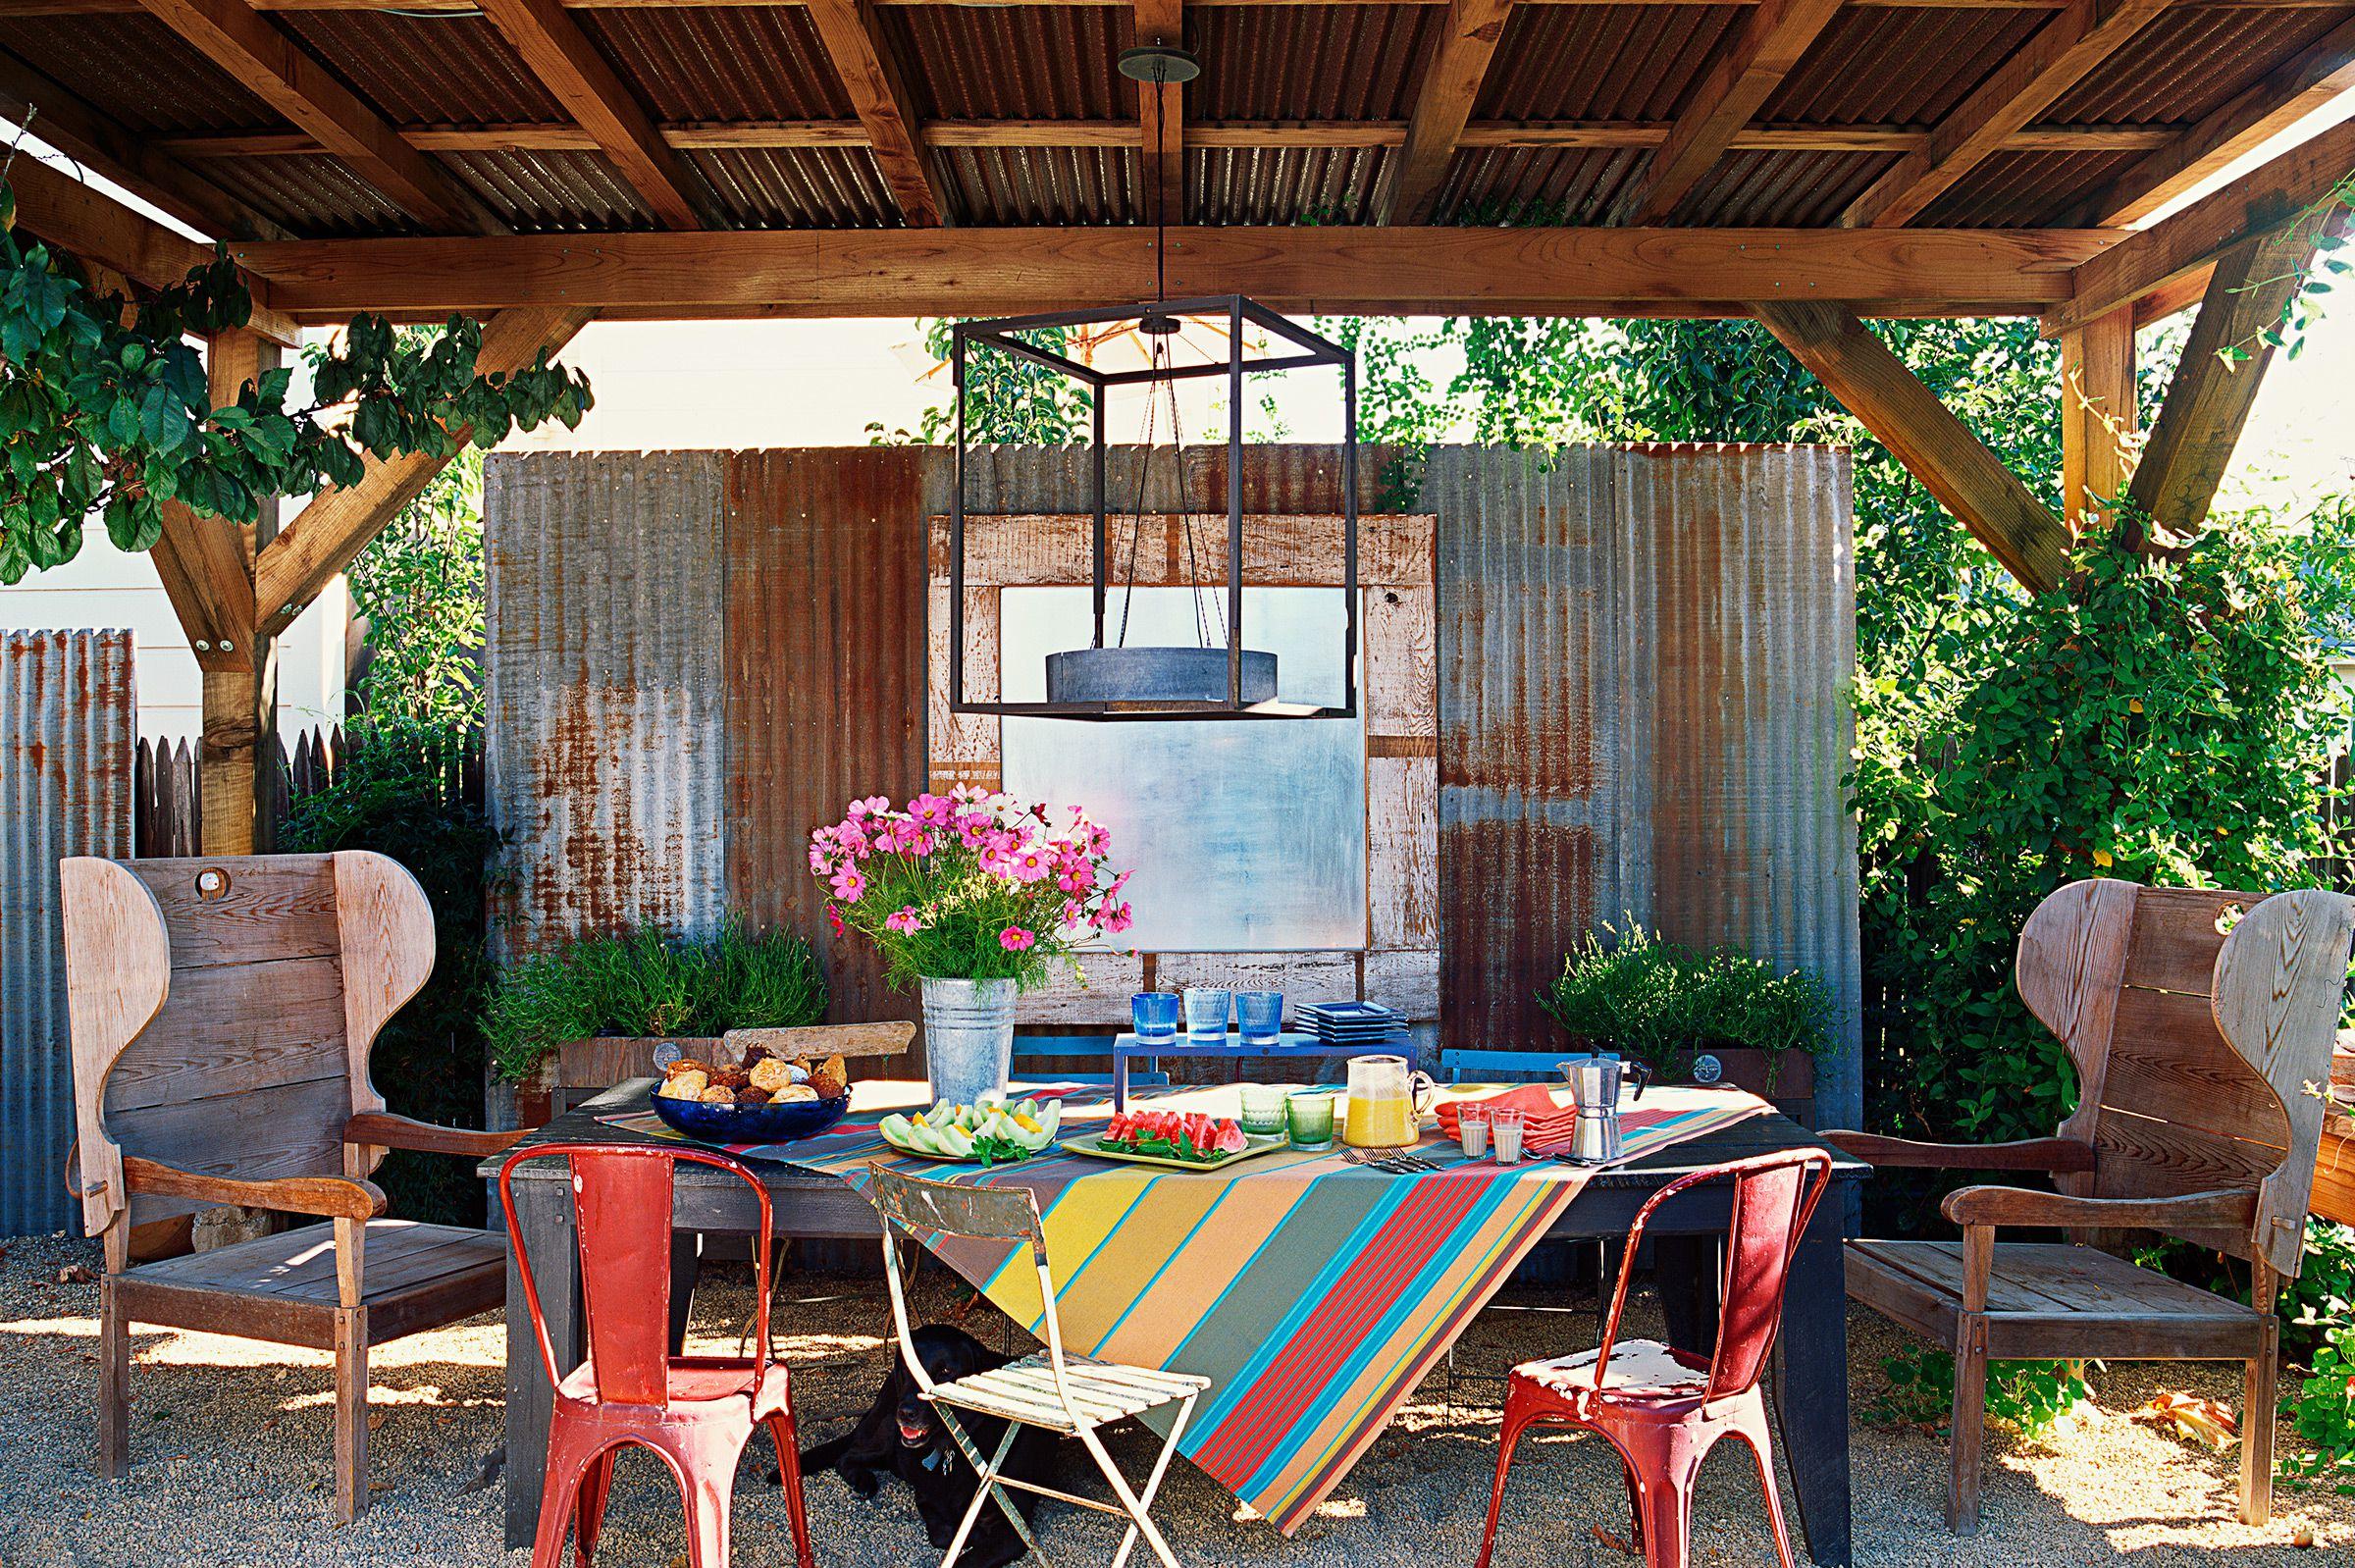 Outdoor Rooms As The Perfect Staycation Destinations This Old House